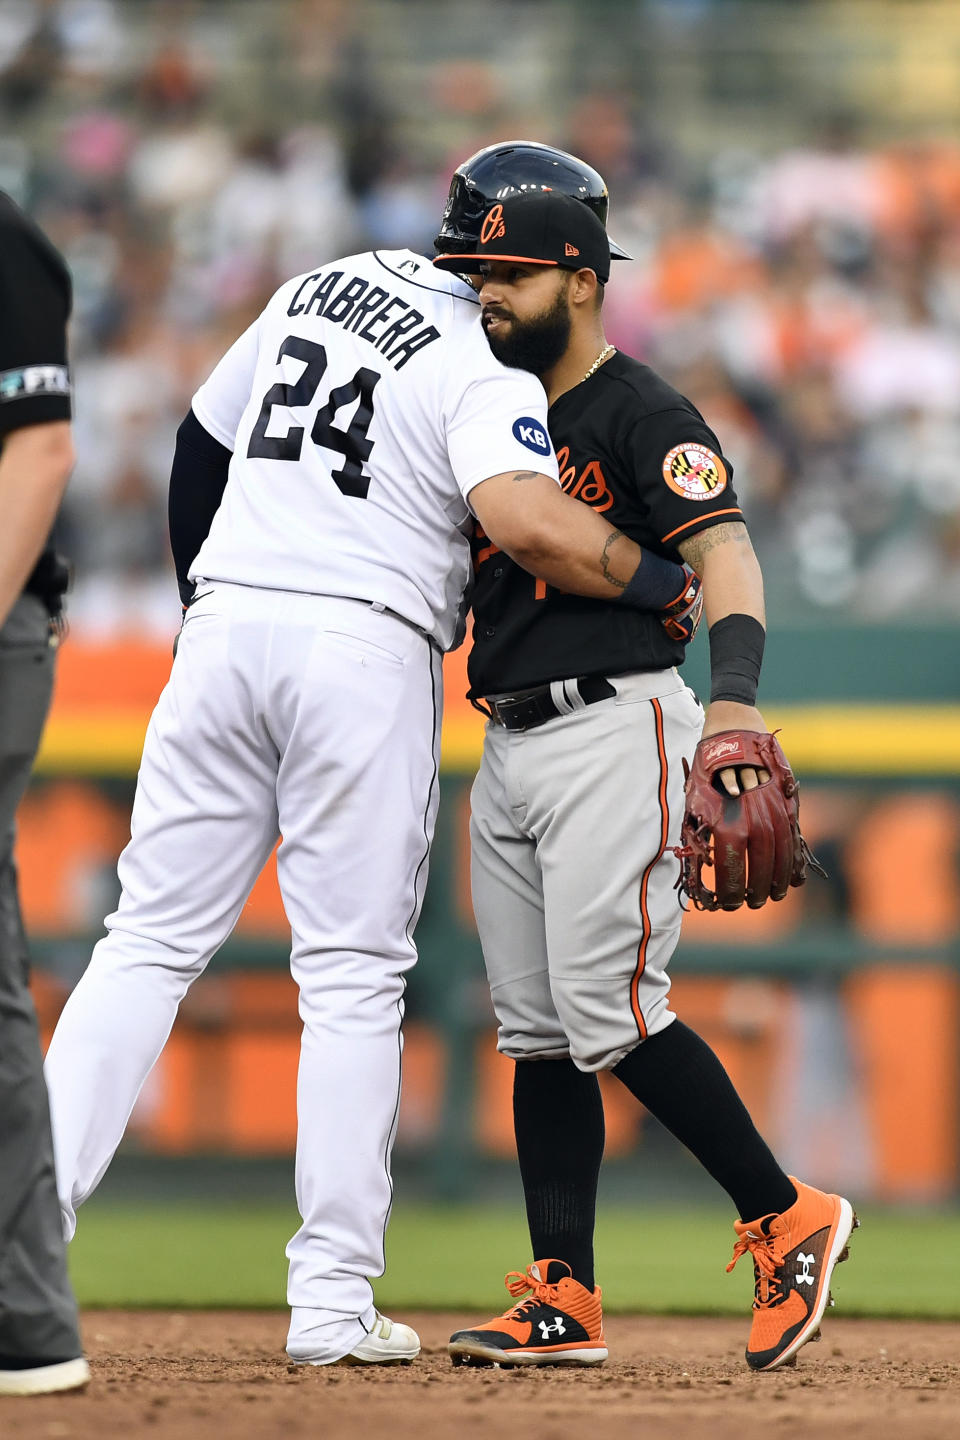 Detroit Tigers' Miguel Cabrera, left, is congratulated by Baltimore Orioles second baseman Rougned Odor after Cabrera hit a double, the 602nd of his career, during the third inning of a baseball game Friday, May 13, 2022, in Detroit. Cabrera passed Barry Bonds for 17th place. (AP Photo/Jose Juarez)